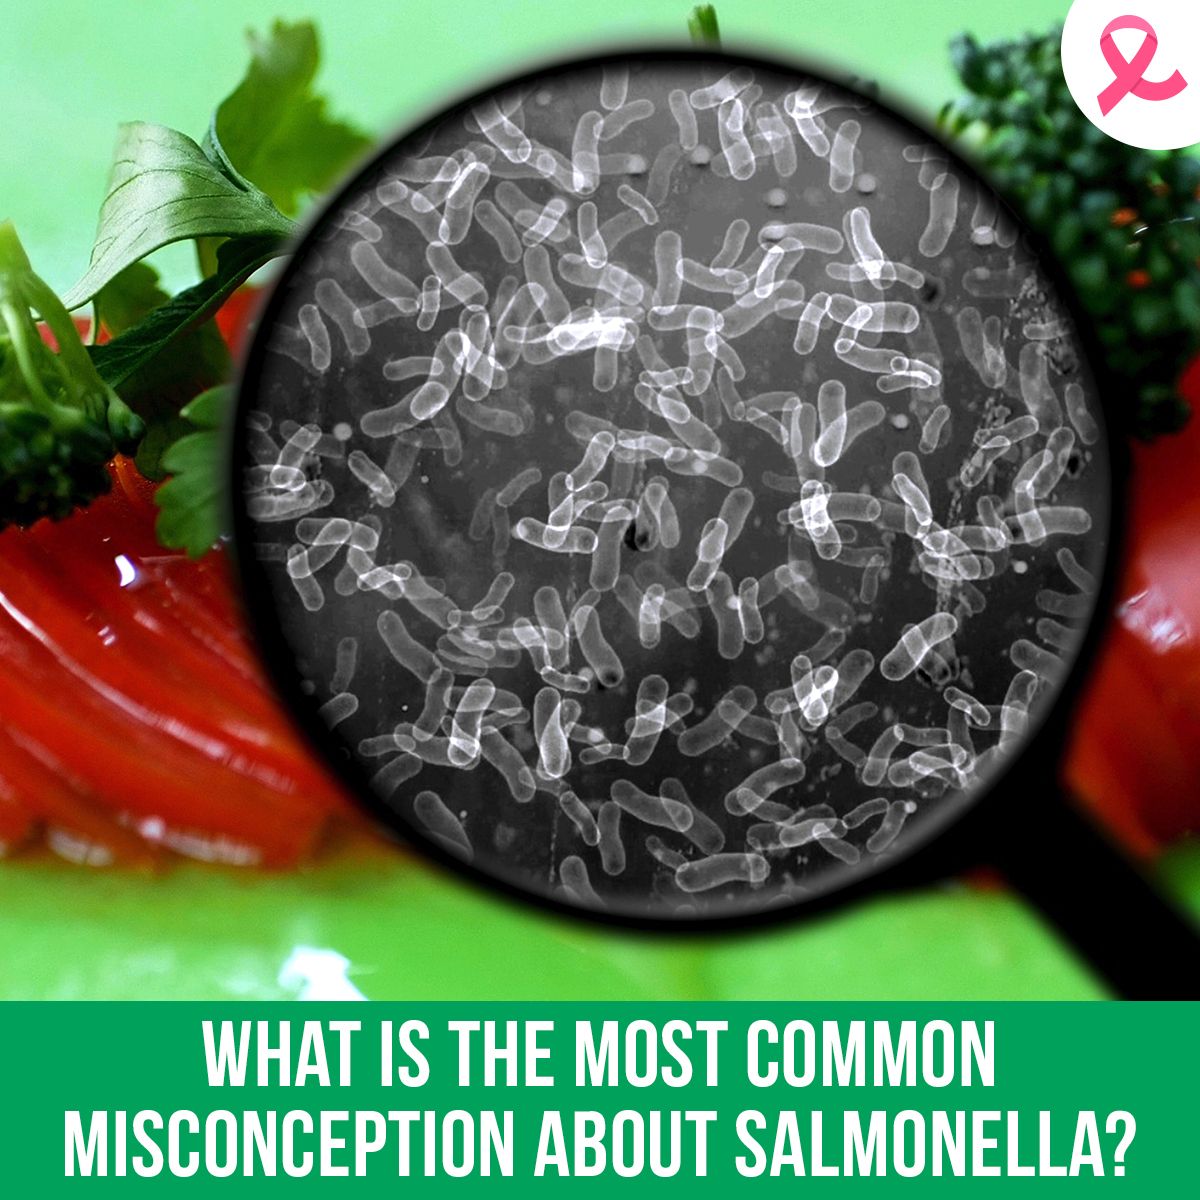 What Is the Most Common Misconception About Salmonella?